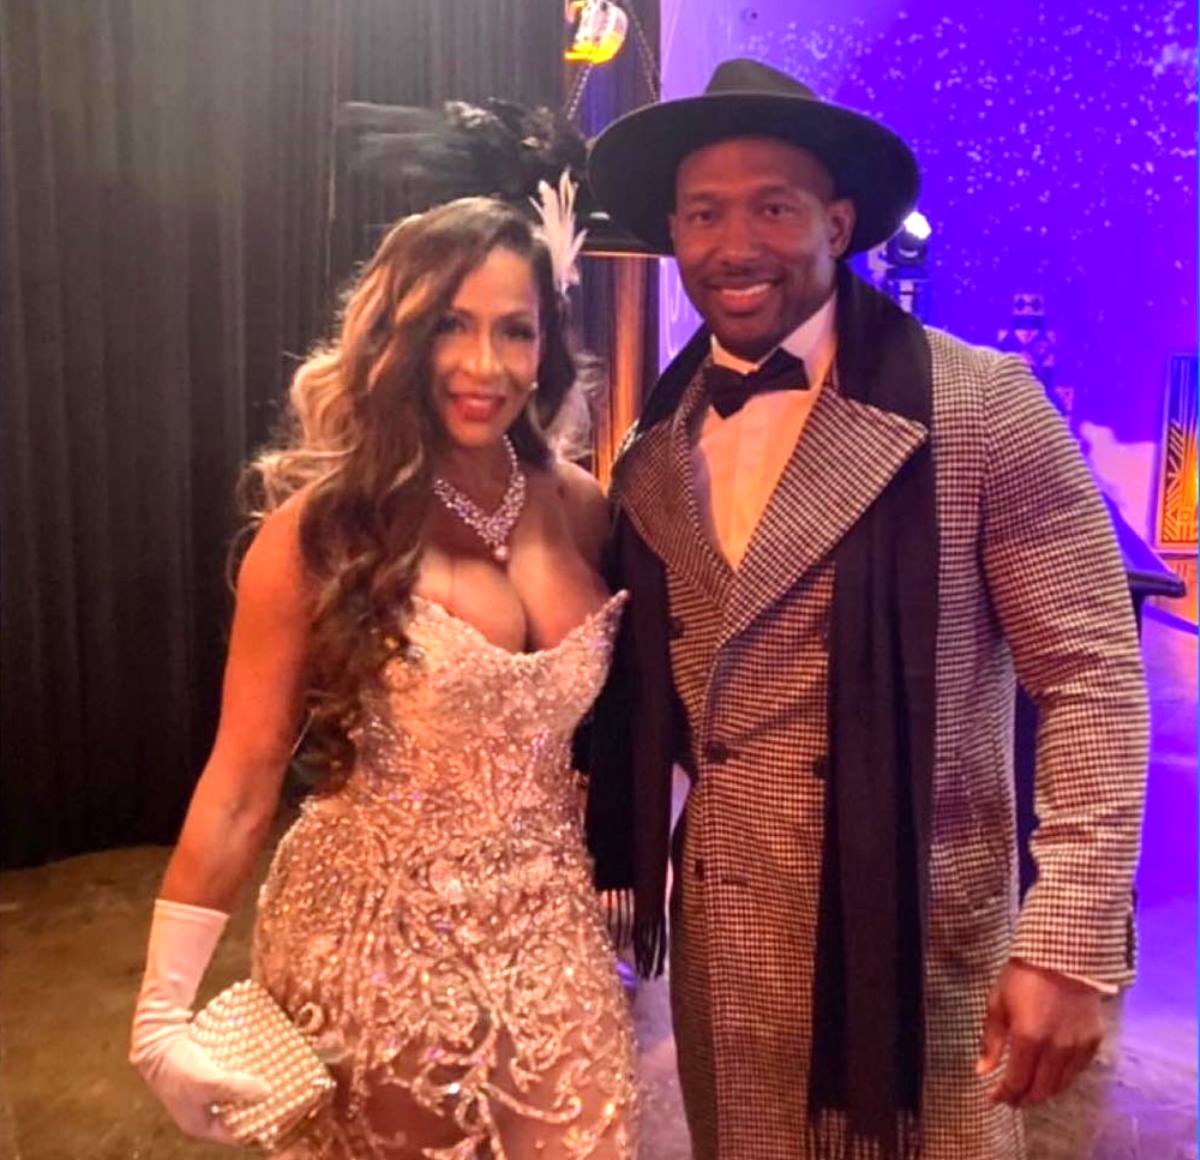 PHOTOS: Sheree Whitfield and Martell Holt Go Public at RHOA Event as Filming Begins on Season 15 With Rumored Newbie Janell Stephens